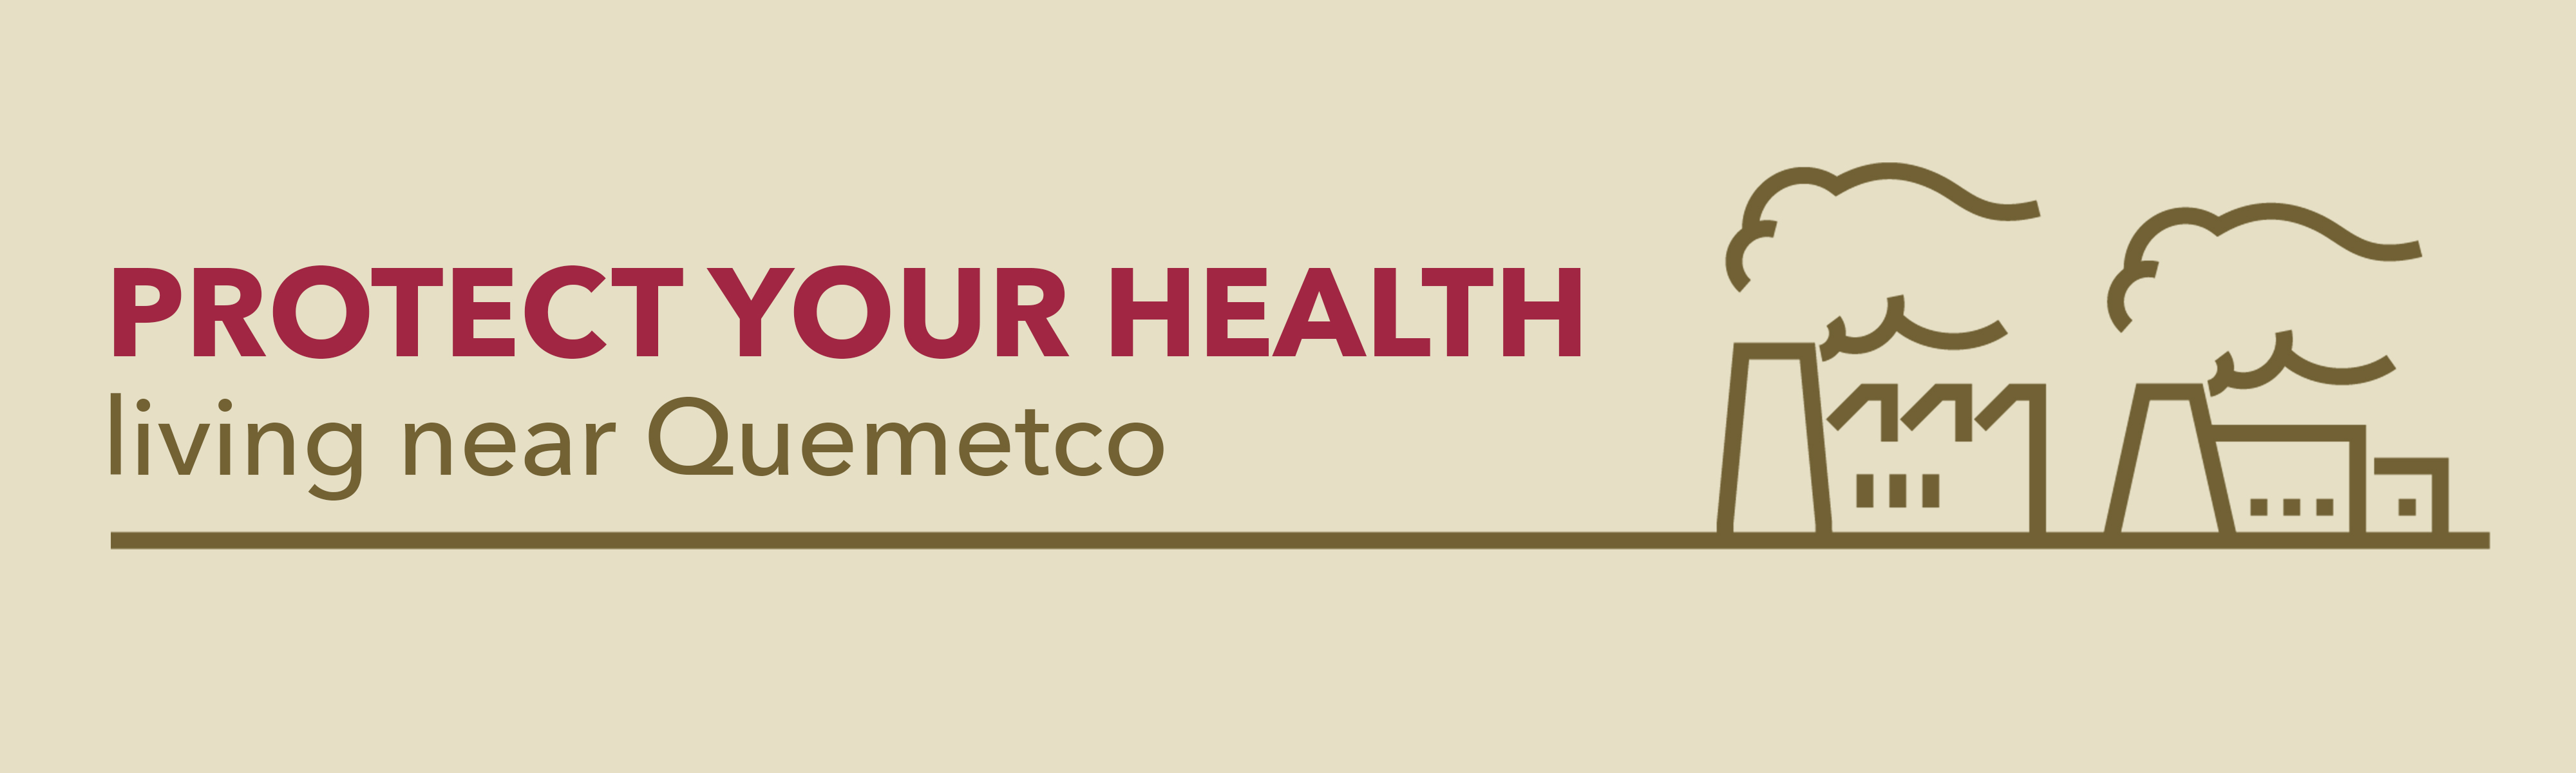 Protect Your Family's Health Living near Quemetco